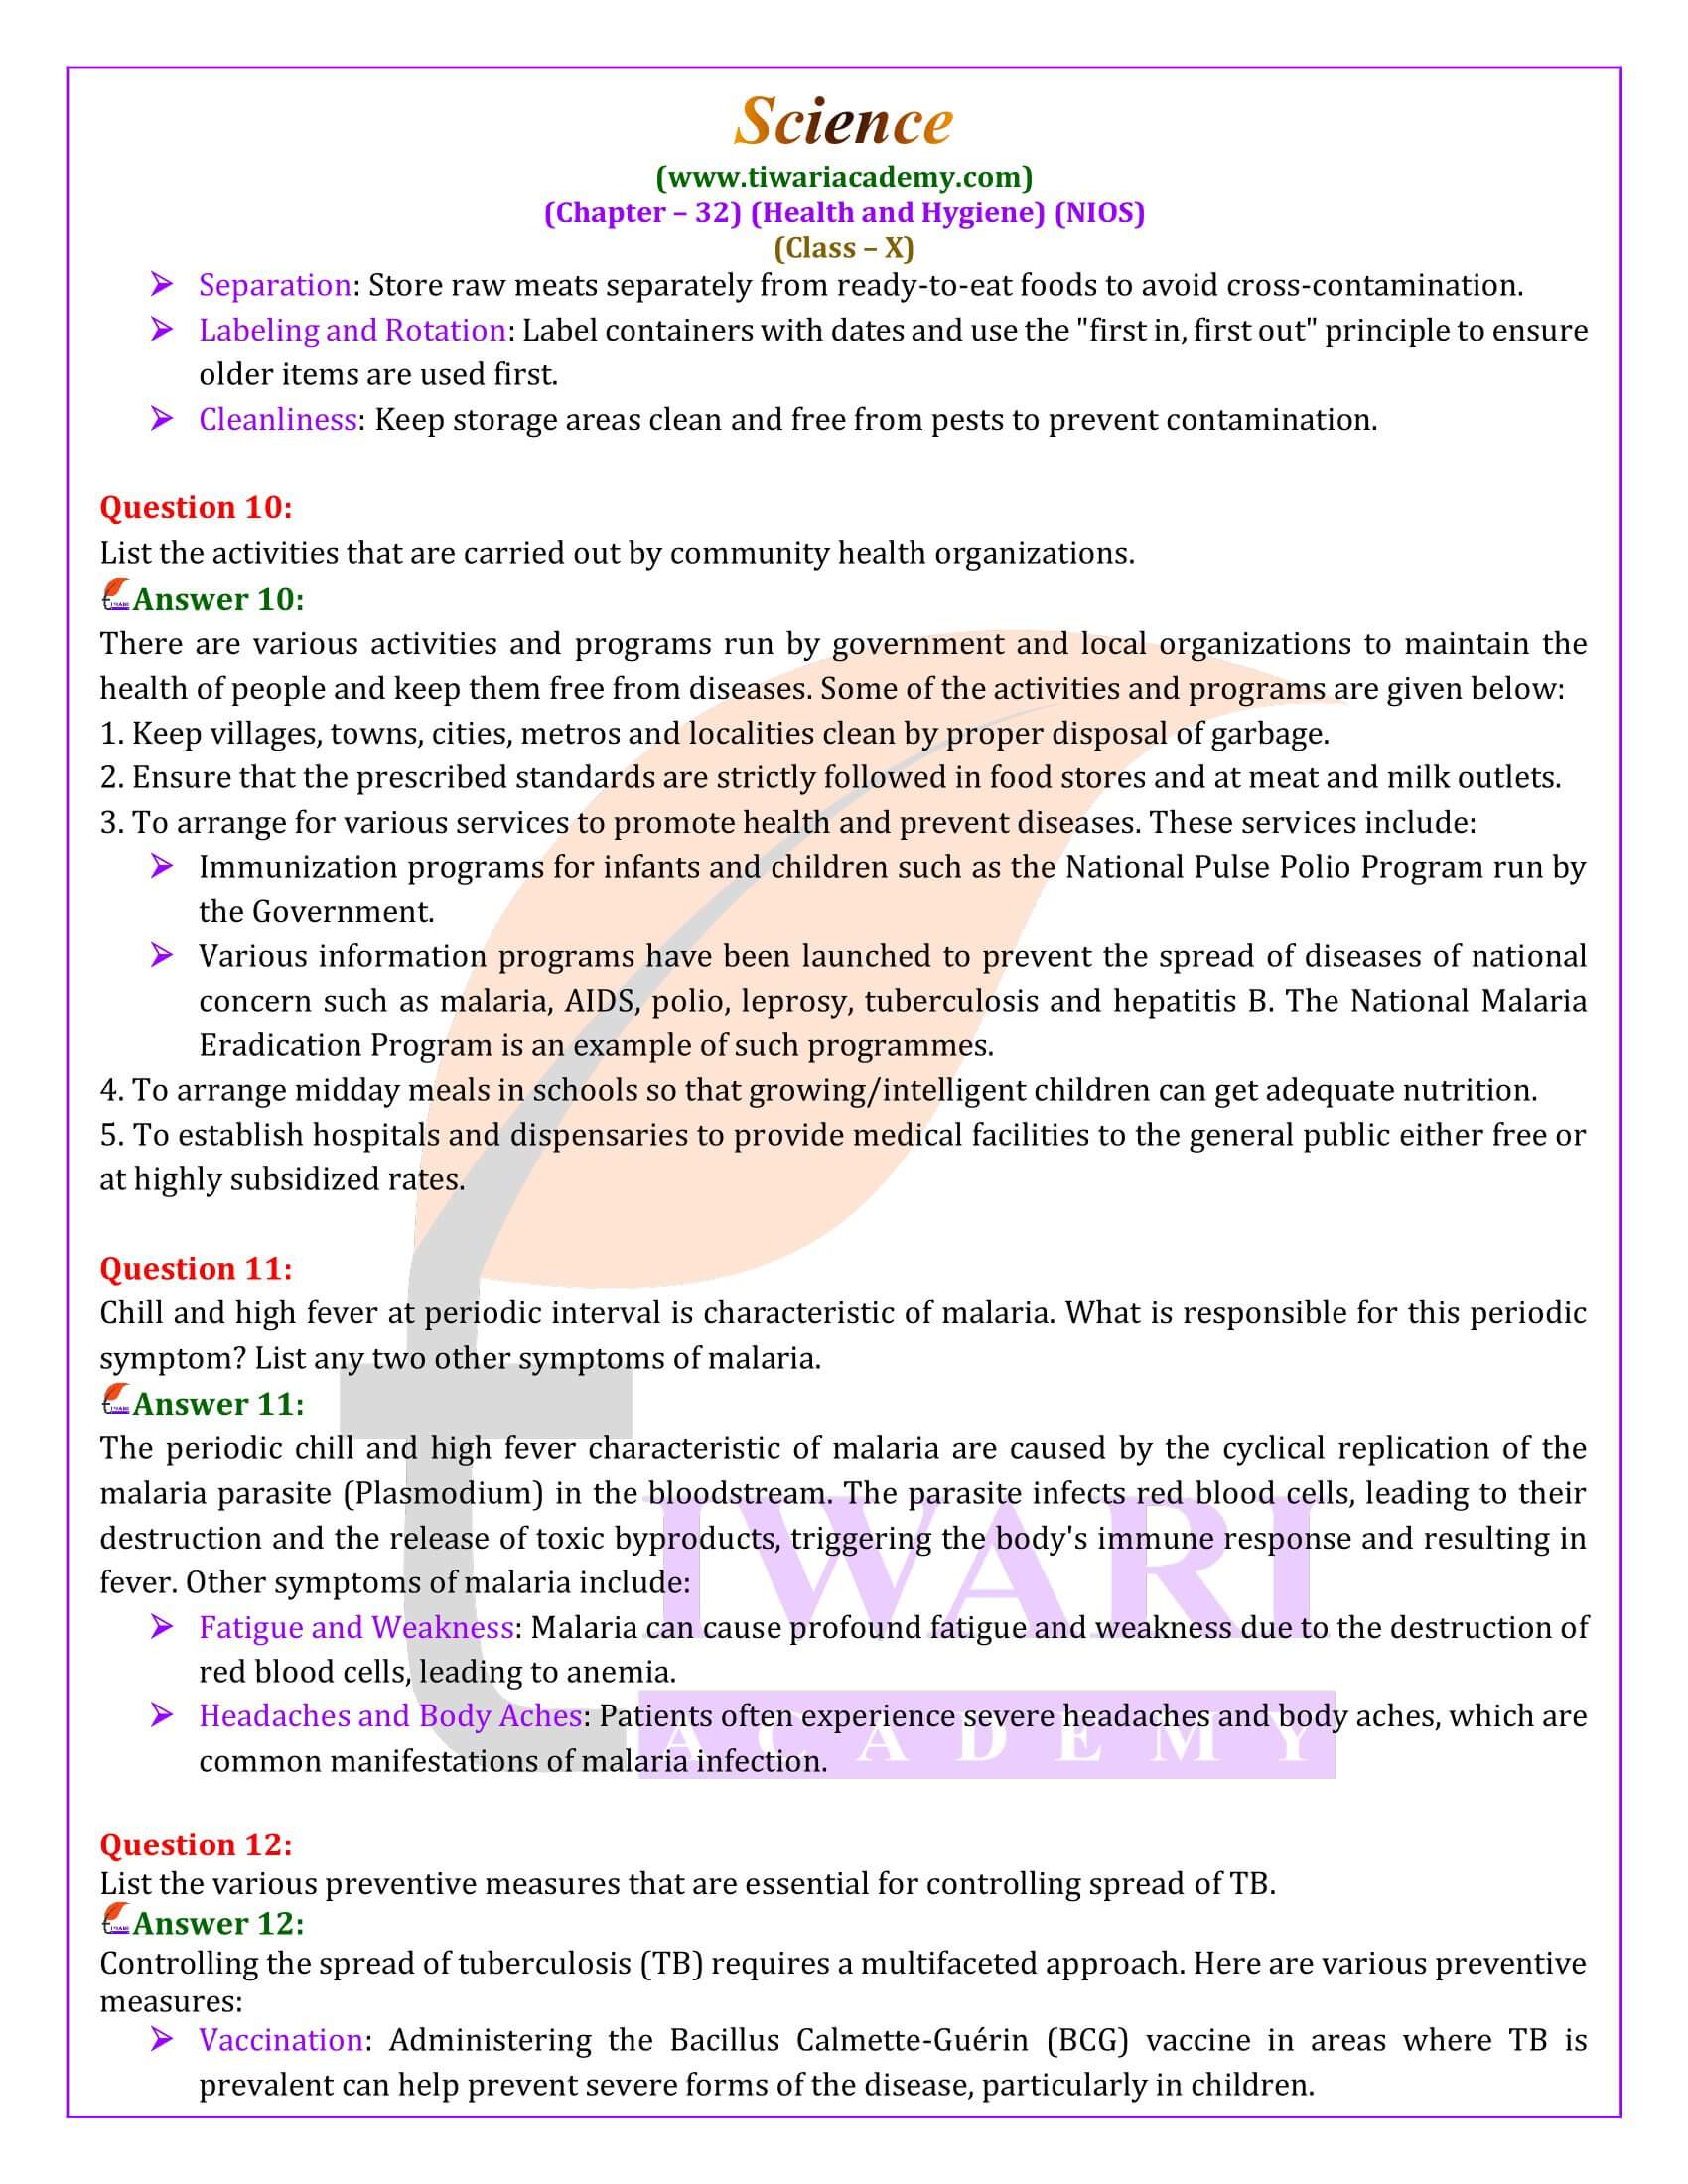 NIOS Class 10 Science Chapter 32 Revision